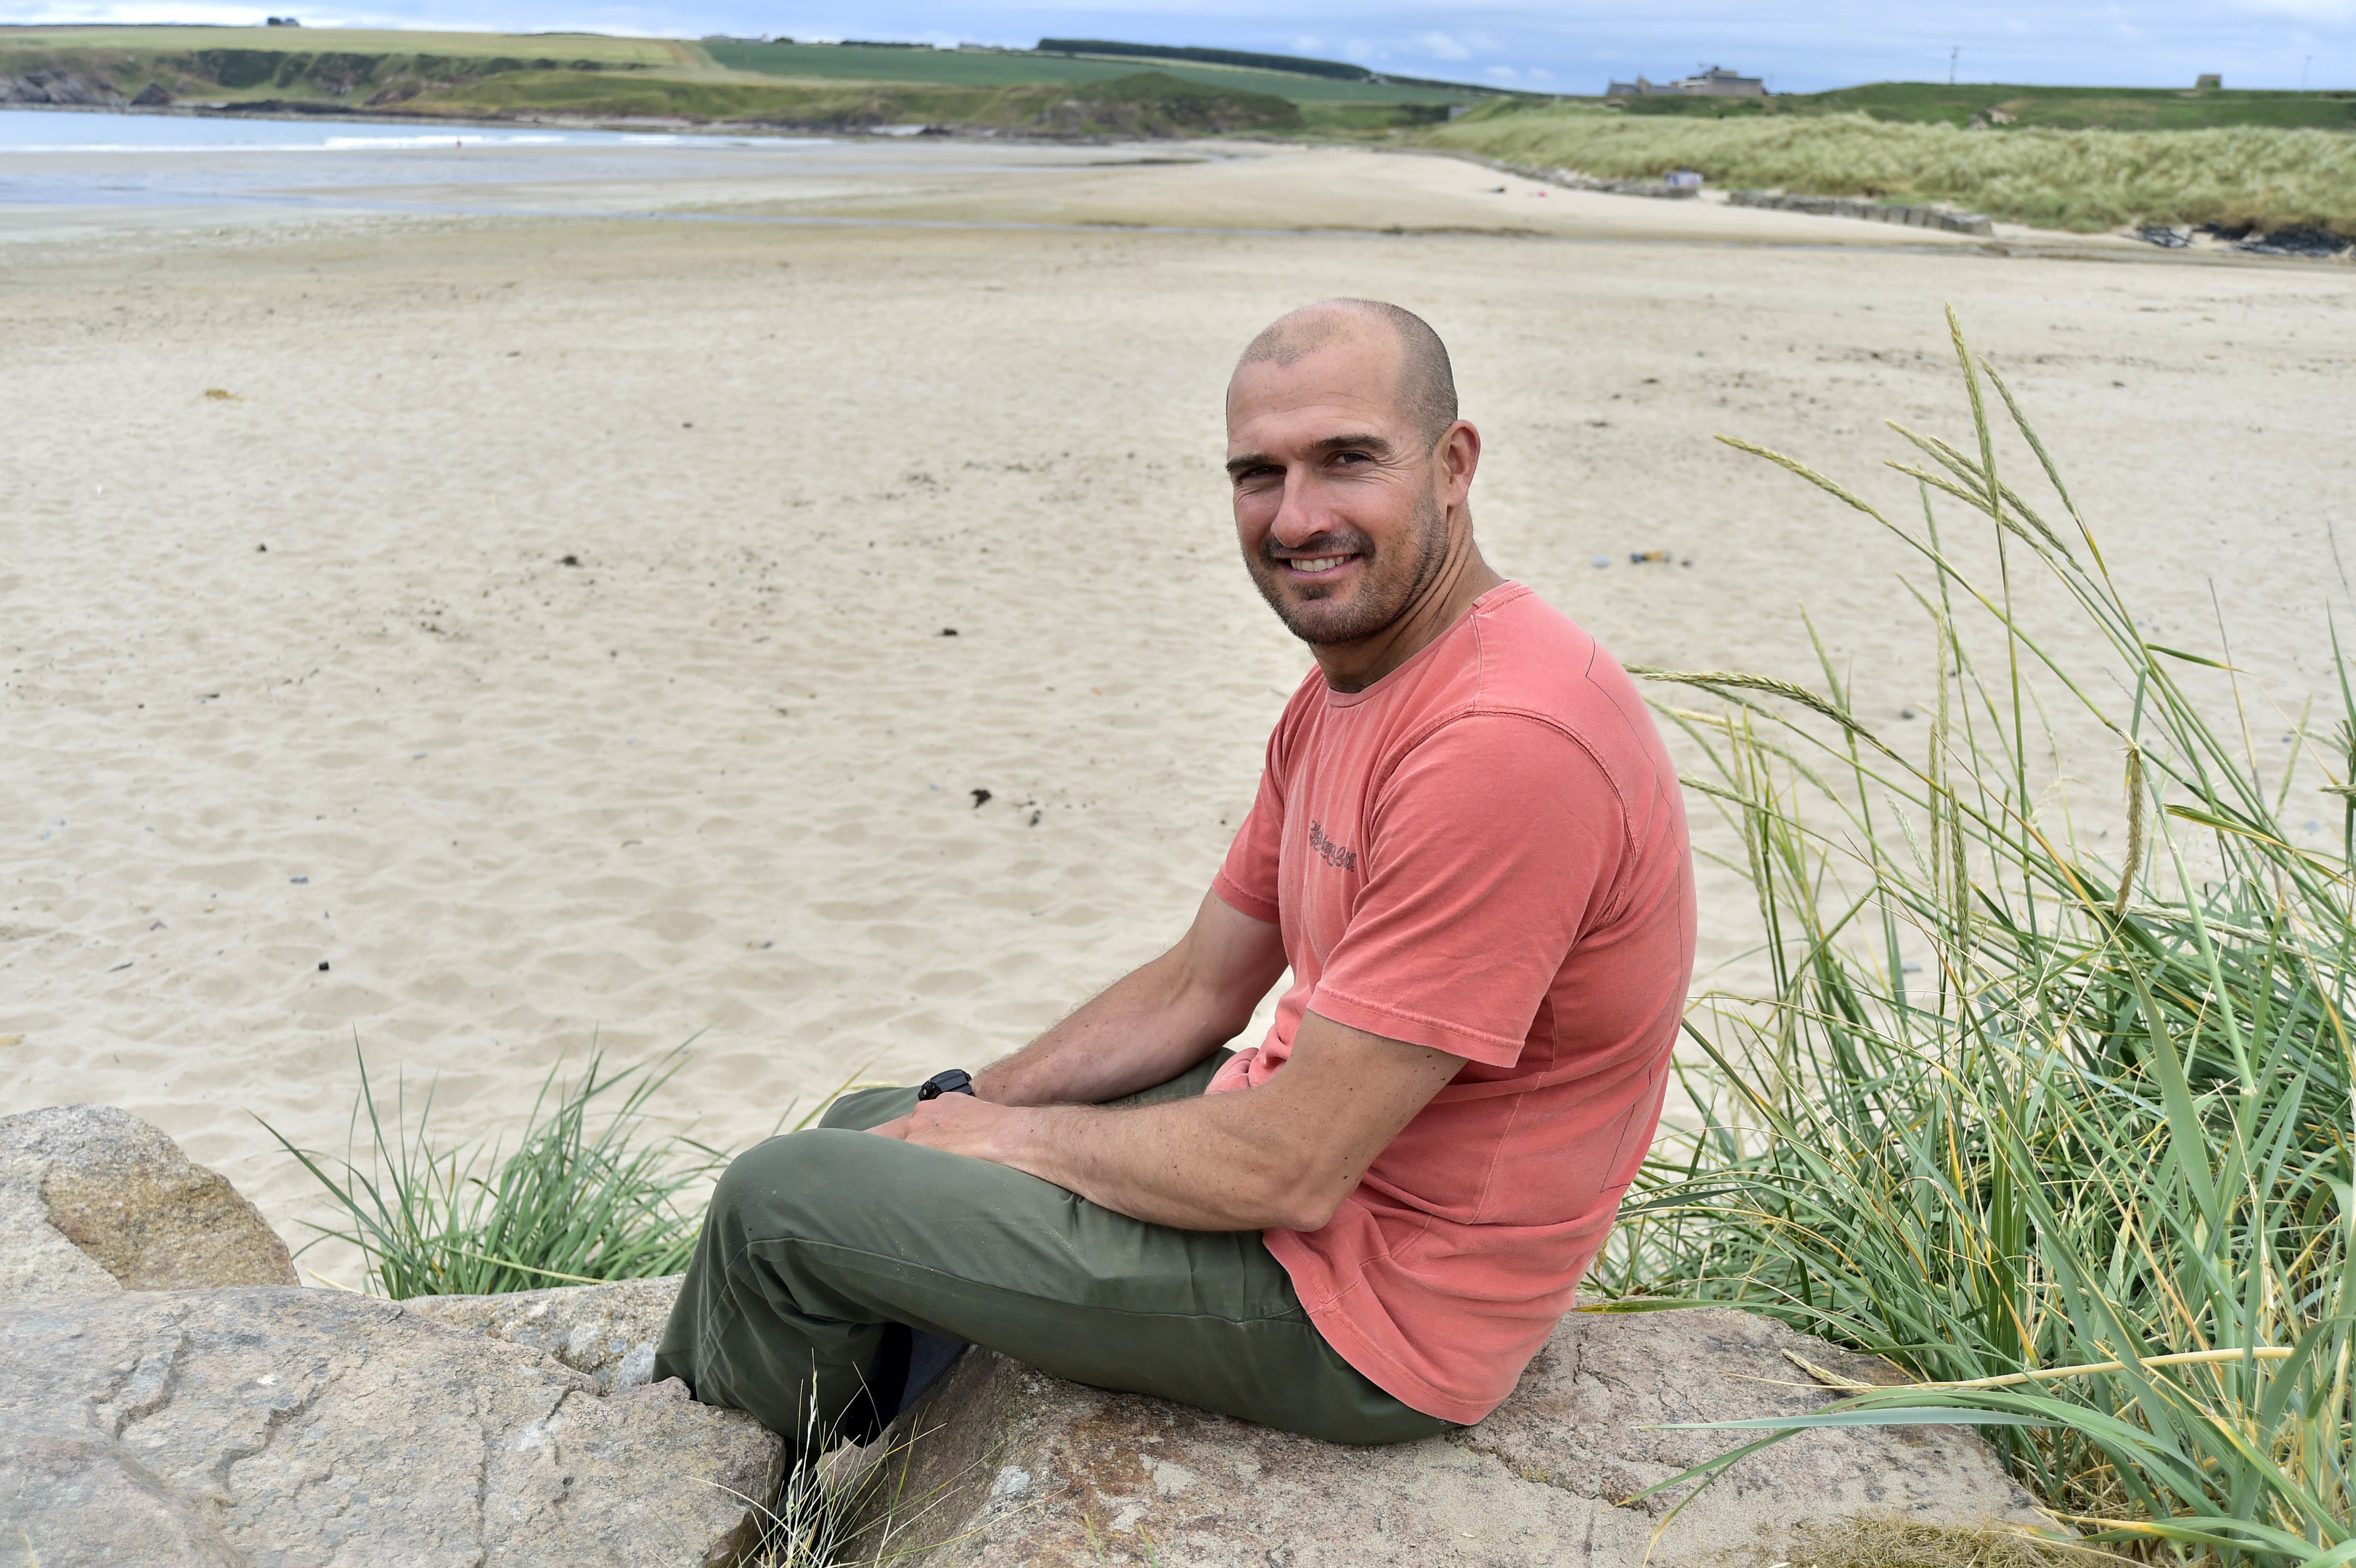 Sandend community organiser Craig Sullivan is delighted that running power cables over the beach for the Moray West Windfarm is not now going to happen.